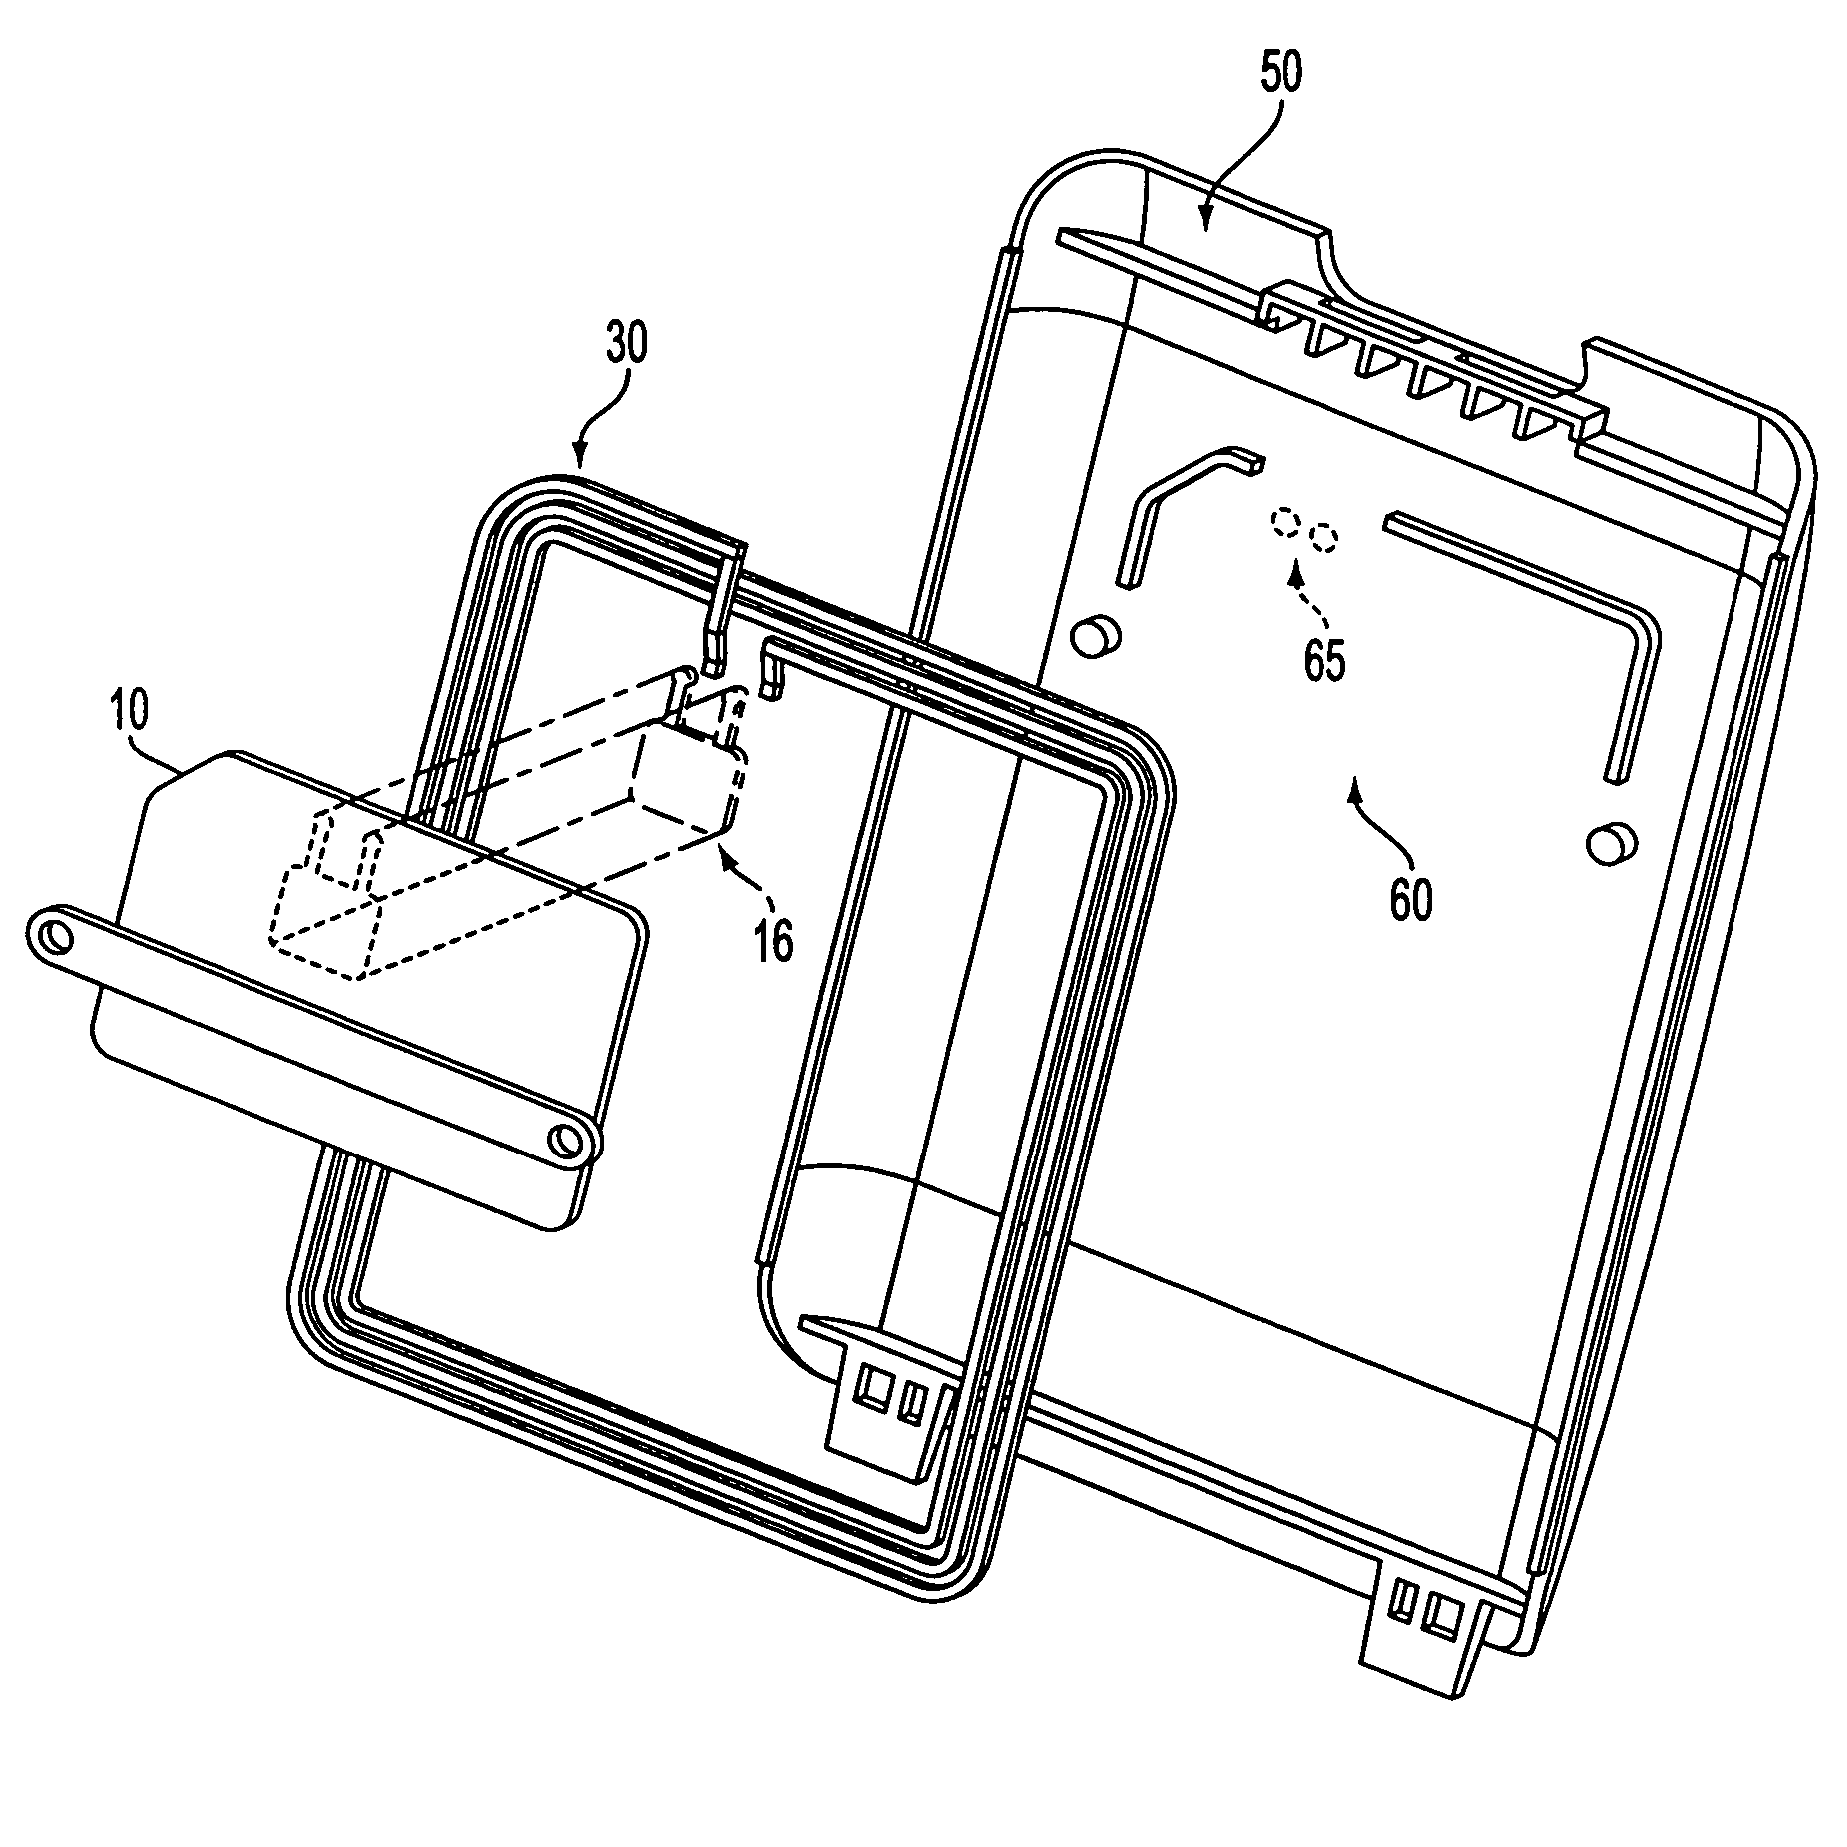 Contactless SIM card carrier with detachable antenna and carrier therefor